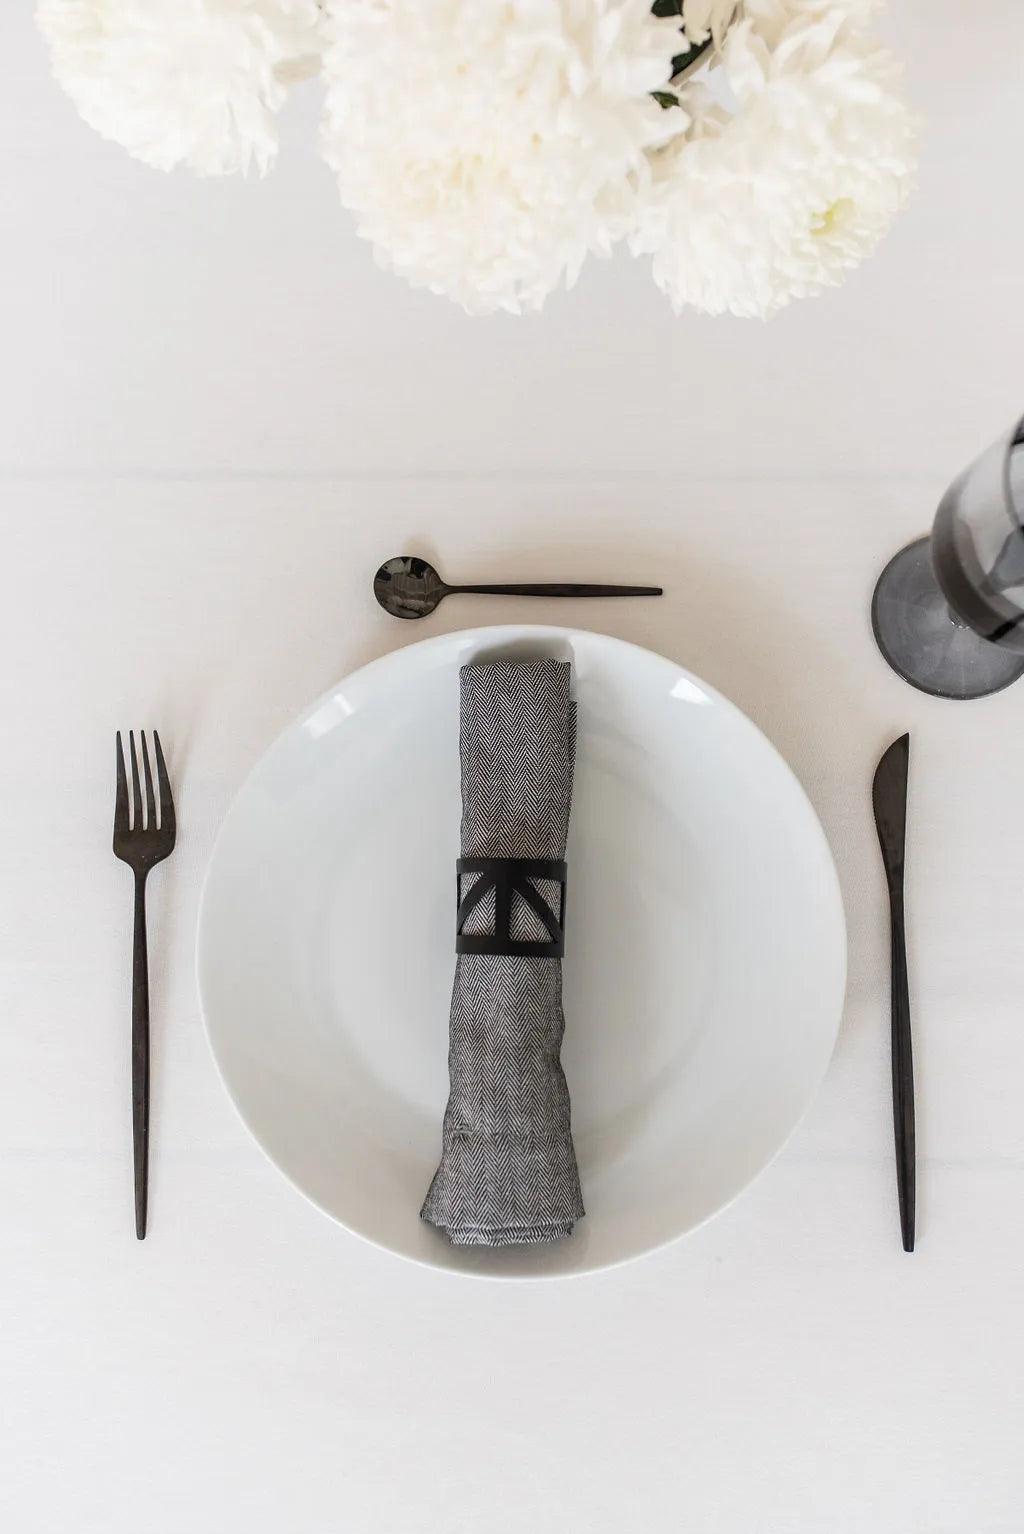 Black metal napkin ring holding a grey napkin sitting on a white plate with black cutlery on a white table cloth with a white flower centerpiece